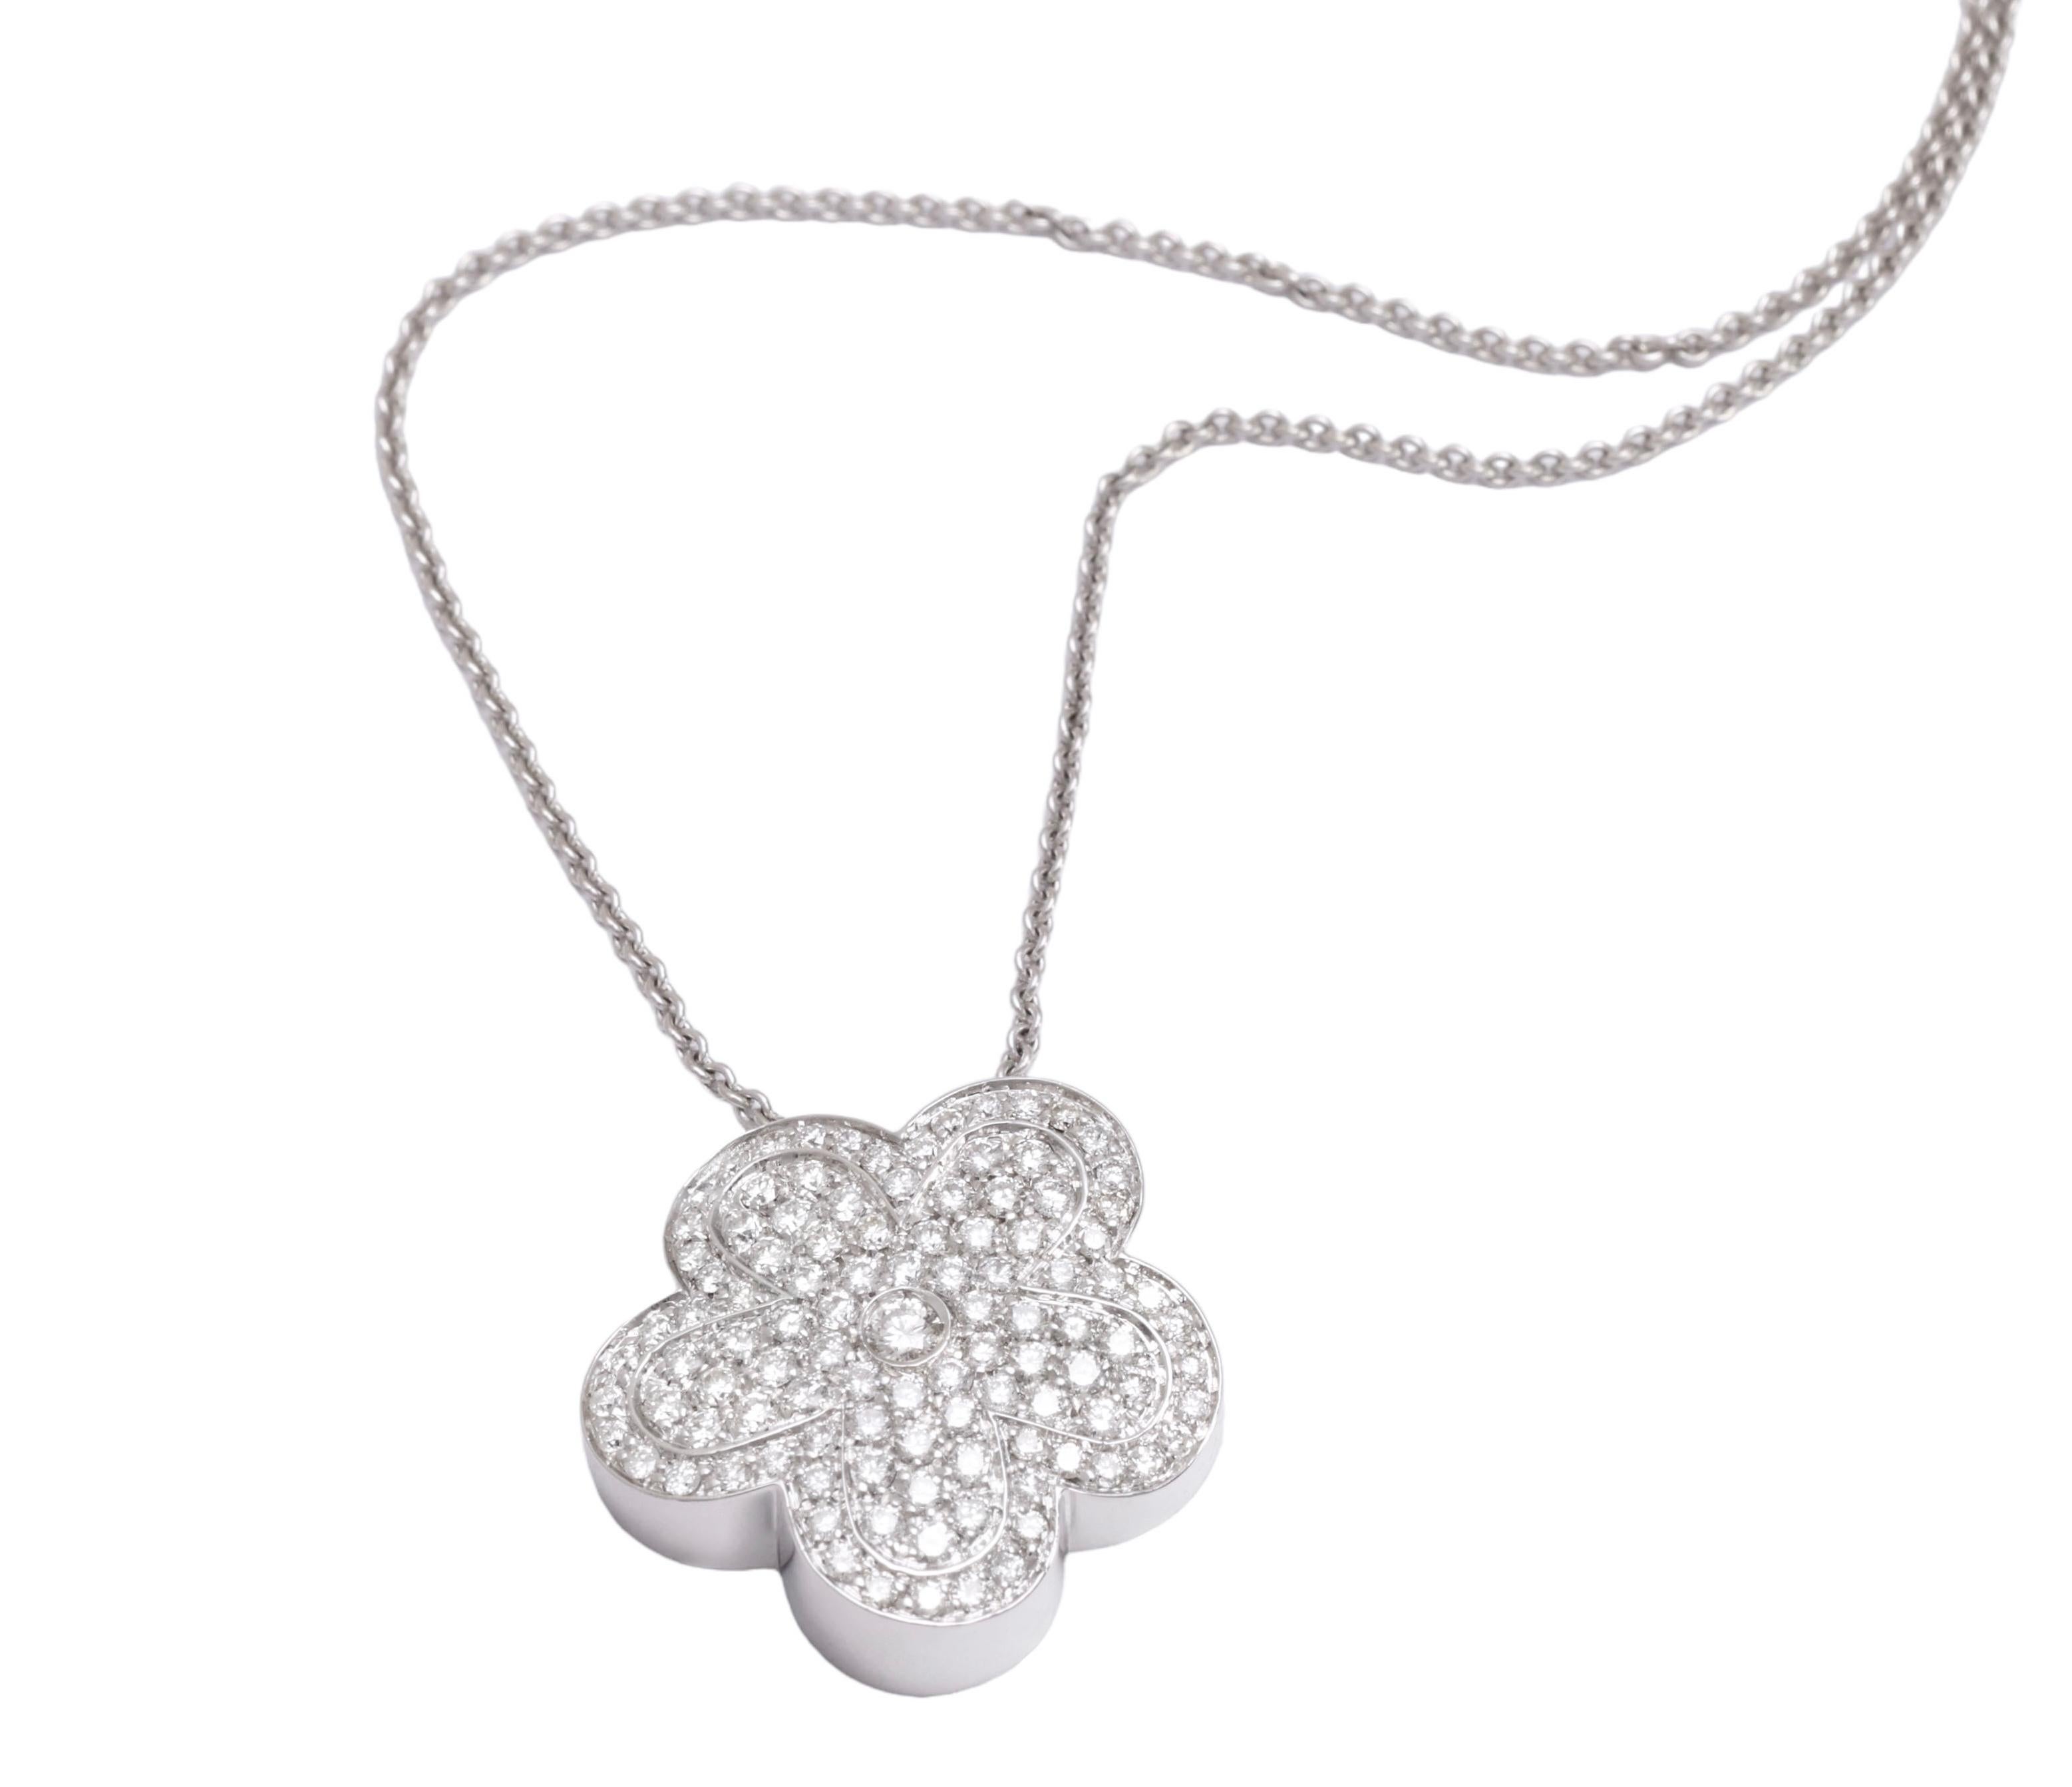 Beautiful 18 kt. White Gold Flower Pendant / Necklace With 1.18 ct. Diamonds 

Matching Ring : Ref: LU1752212579182

Diamonds: White brilliant cut diamonds, together approx. 1.18 ct. F/G VVS/VS

Material: 18 kt. white gold

Measurements: Pendant: